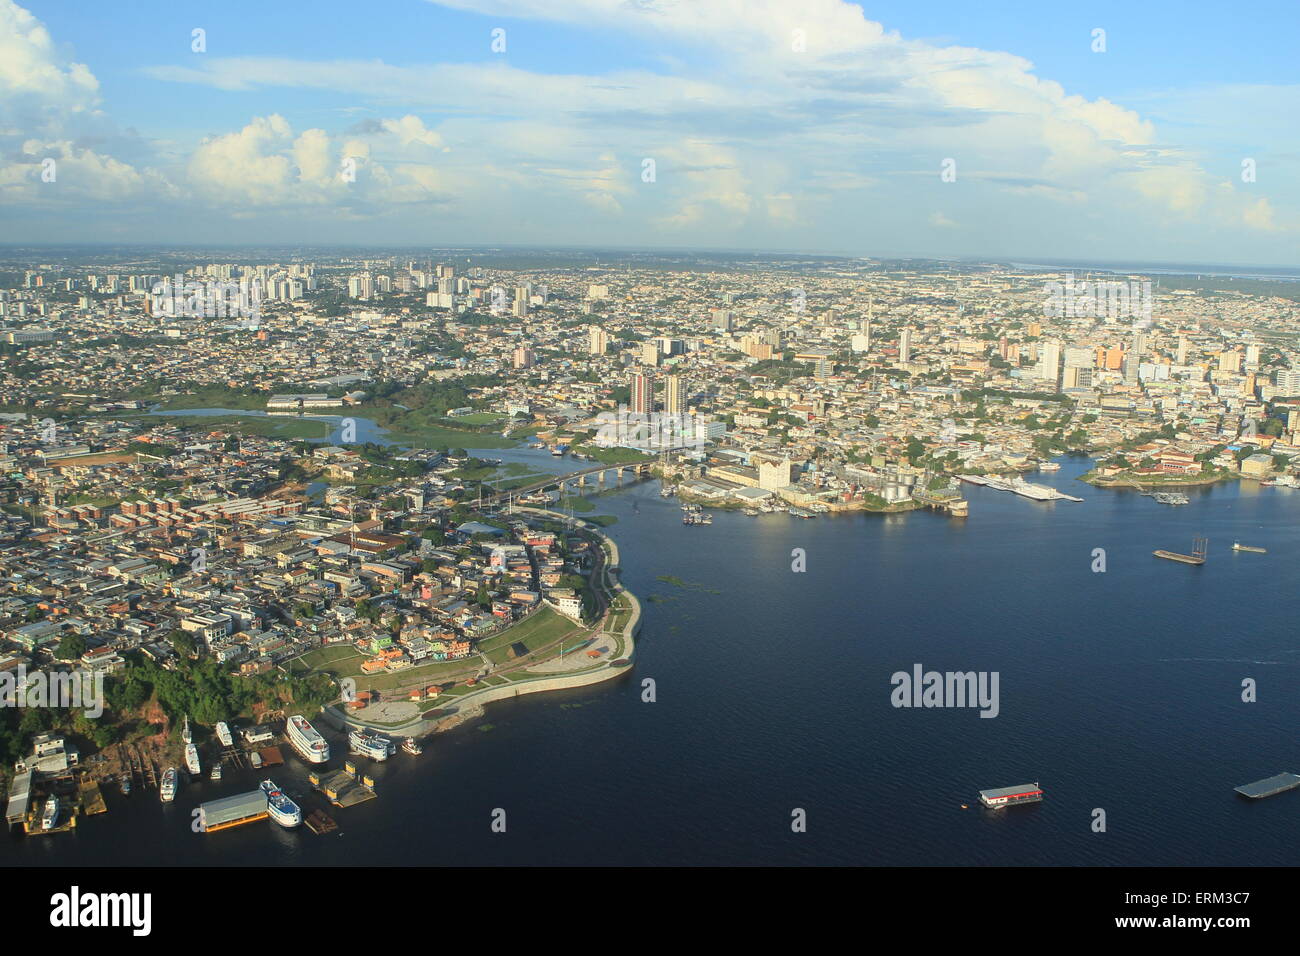 City of Manaus, Amazonas state capital and the main financial center, corporate and economic development of northern Brazil. Stock Photo